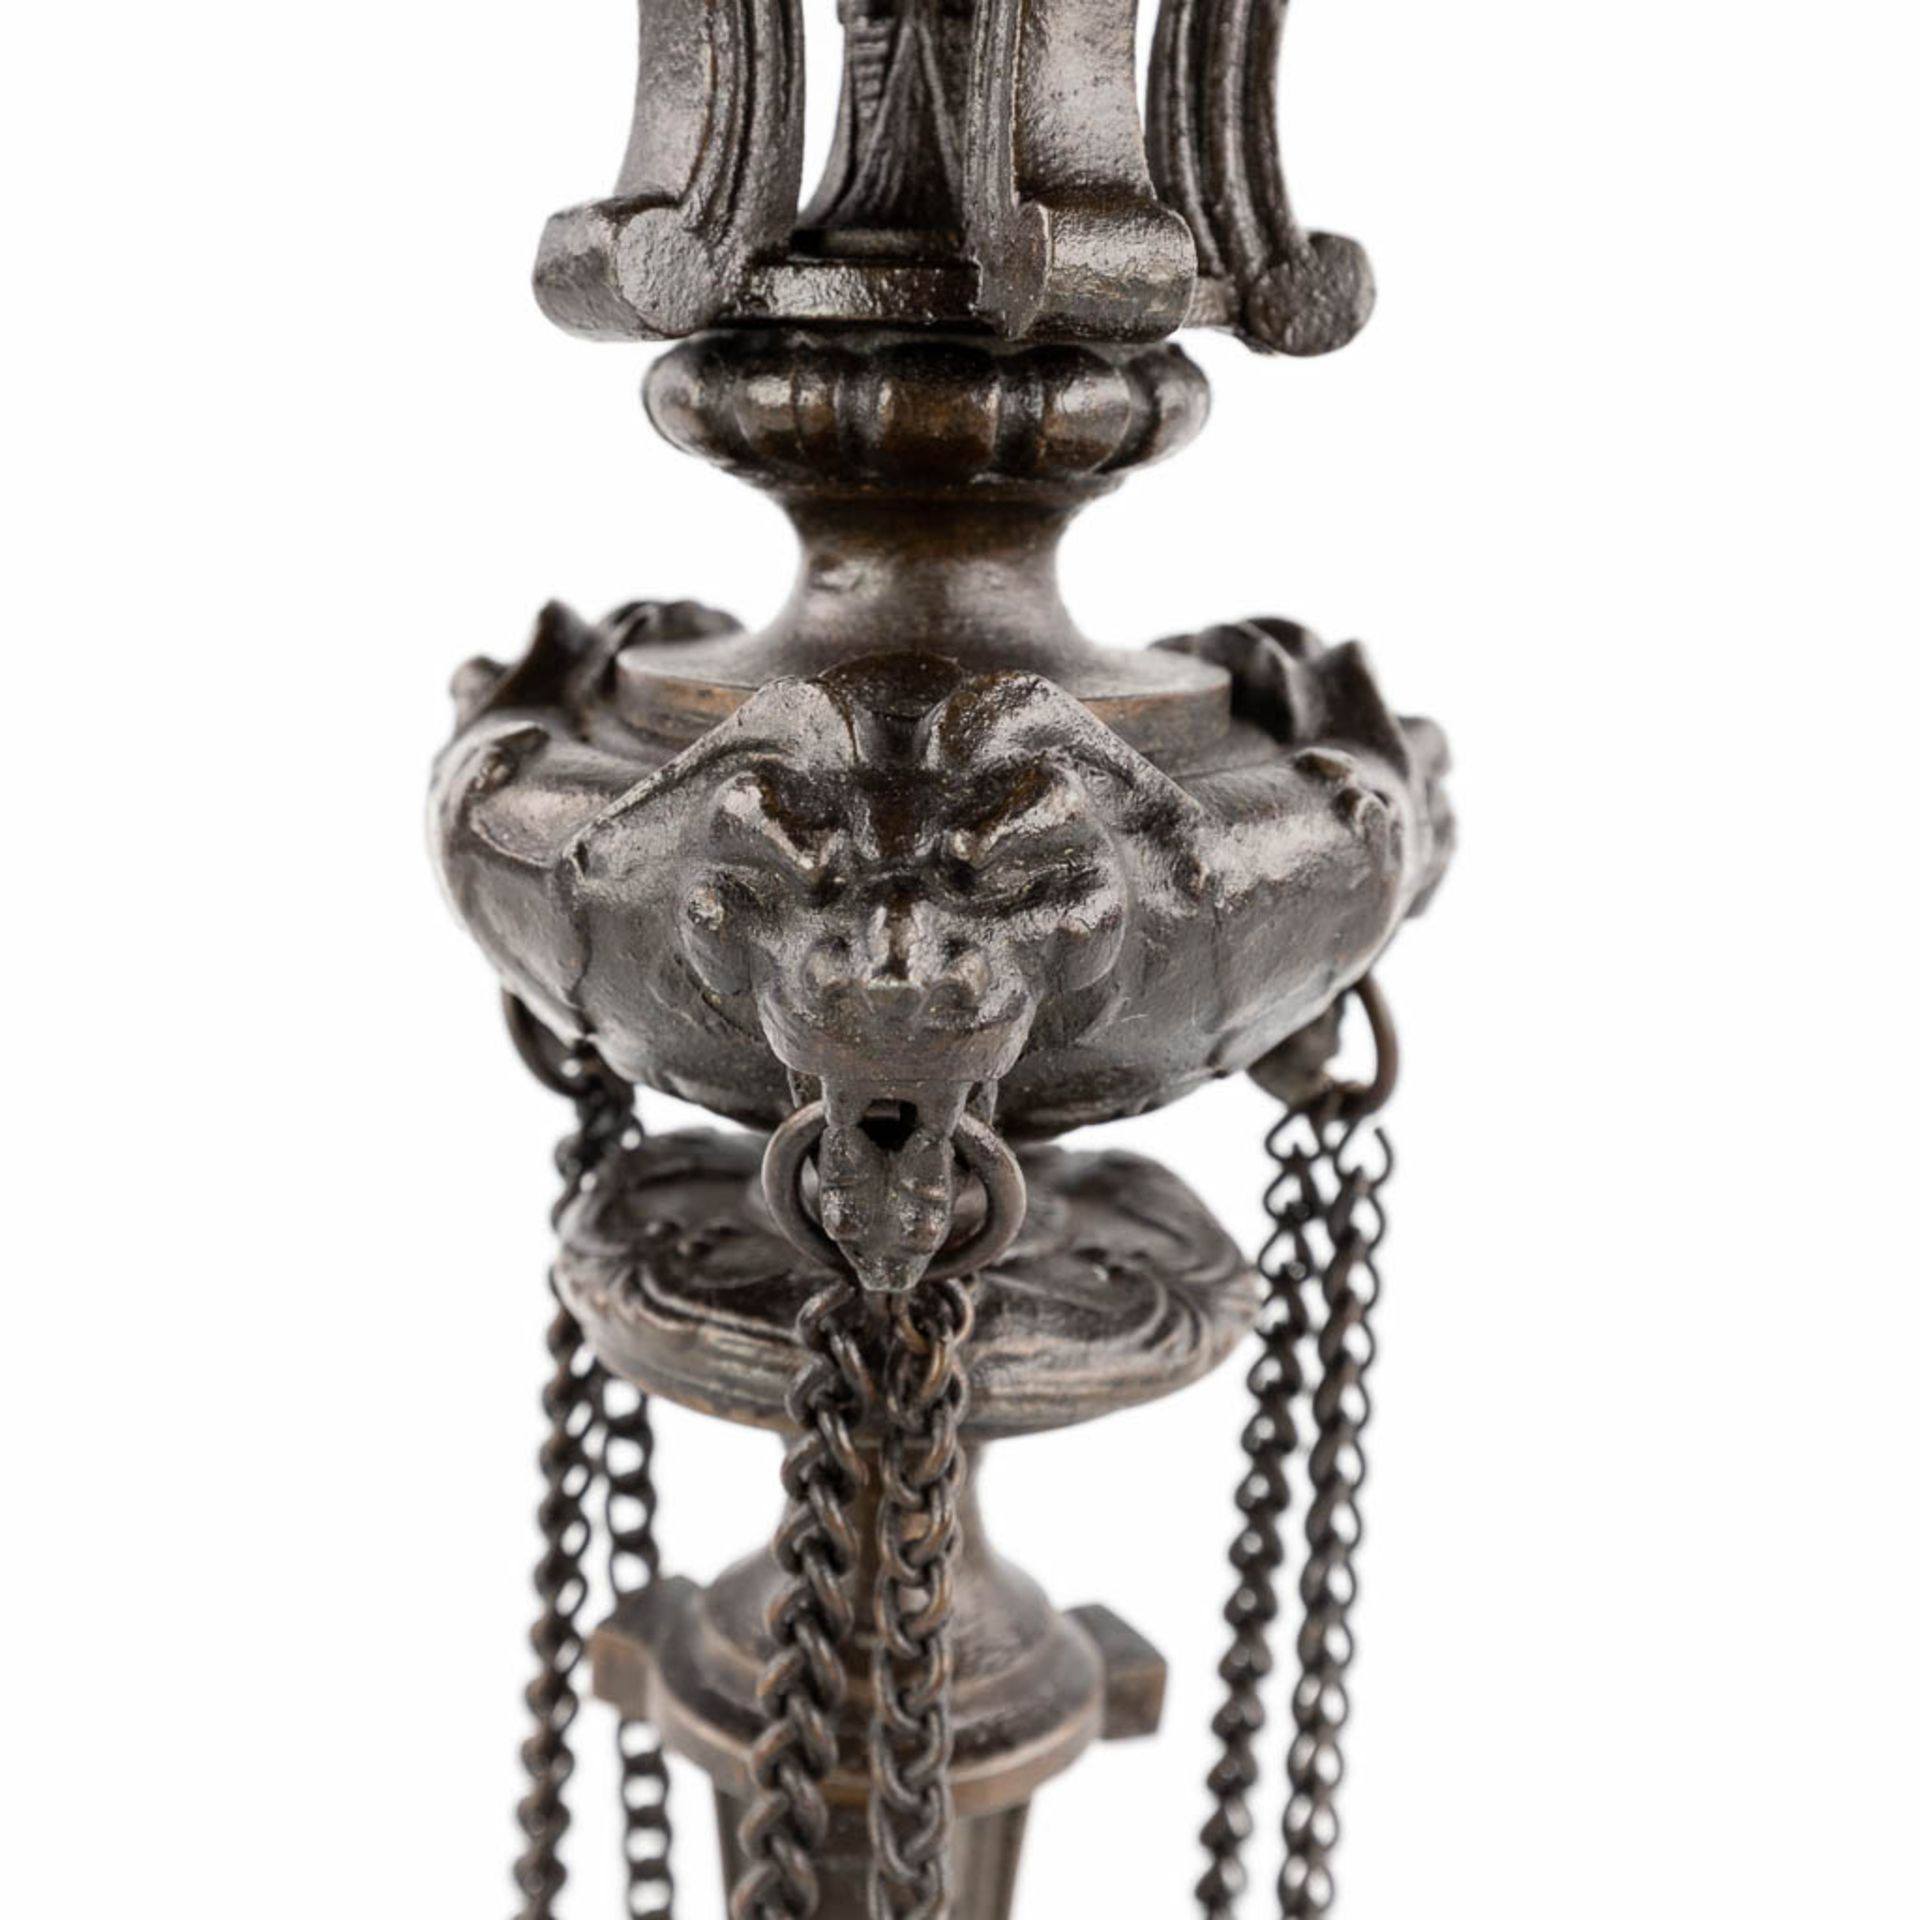 A pair of candelabra, bronze decorated with birds. 19th C. (H:56 x D:26 cm) - Image 7 of 12